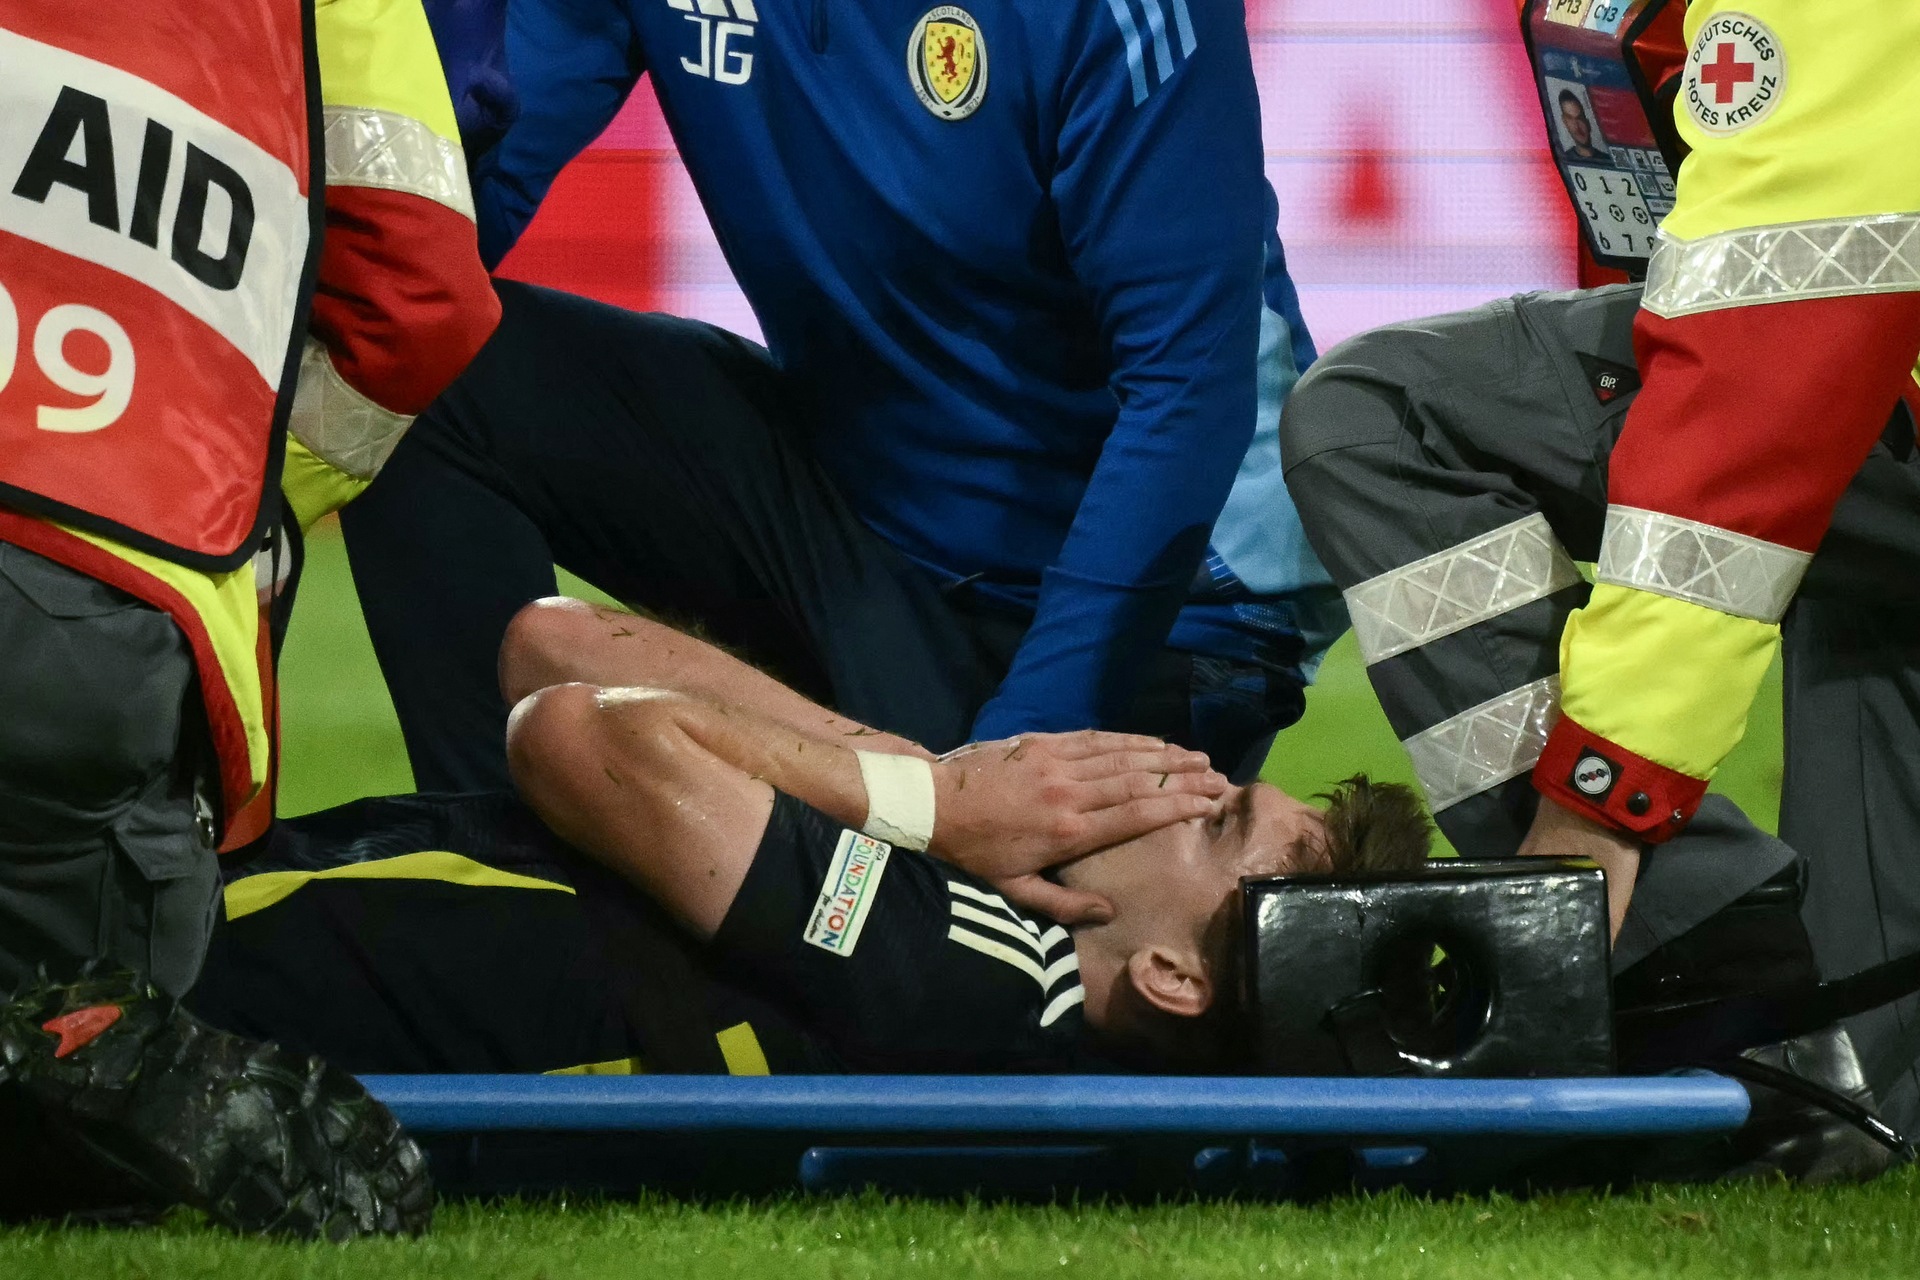 Kieran Tierney went down injured and had to be stretchered off.